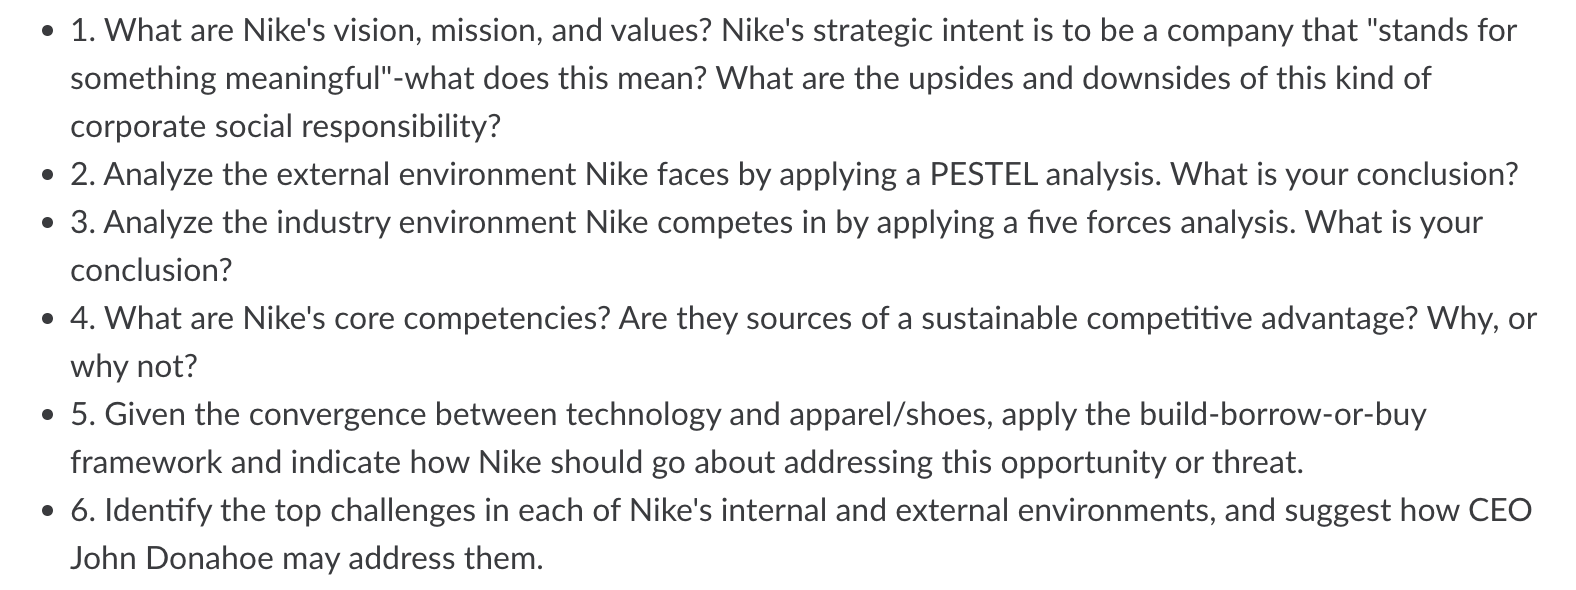 Lezen demonstratie armoede Solved - 1. What are Nike's vision, mission, and values? | Chegg.com